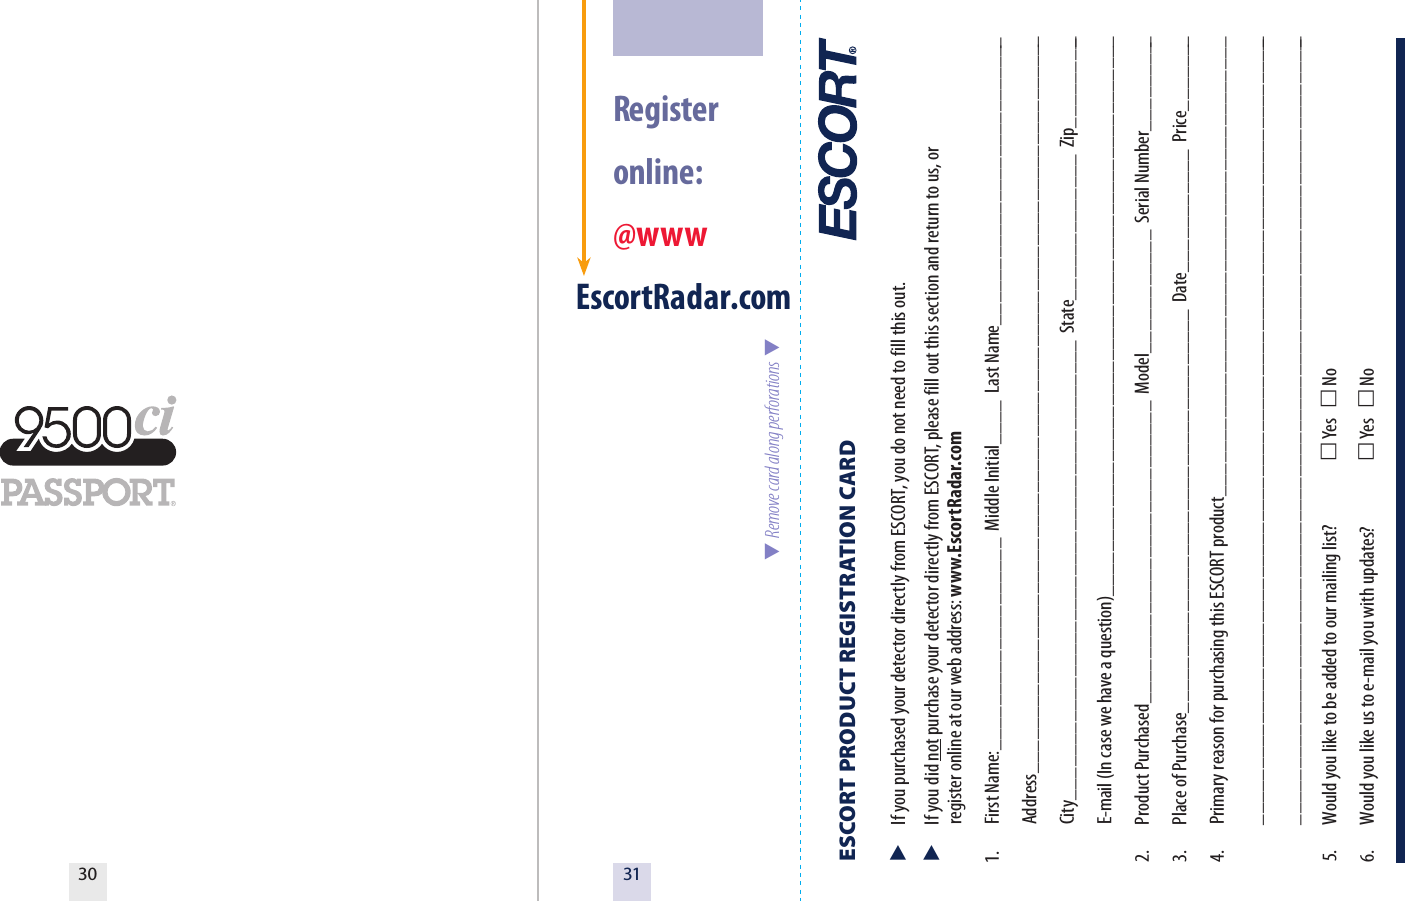 3130  Register  online: @wwwEscortRadar.comESCORT PRODUCT REGISTRATION CARD   If you purchased your detector directly from ESCORT, you do not need to fill this out.  If you did not purchase your detector directly from ESCORT, please fill out this section and return to us, or   register online at our web address: www.EscortRadar.com1.  First Name:___________________  Middle Initial____  Last Name__________________________  Address__________________________________________________________________  City_________________________________________  State_____________  Zip_________  E-mail (In case we have a question)__________________________________________________2.  Product Purchased___________________________  Model___________  Serial Number_________3.  Place of Purchase____________________________________  Date___________  Price_______4.  Primary reason for purchasing this ESCORT product_________________________________________  _______________________________________________________________________  _______________________________________________________________________5.  Would you like to be added to our mailing list?   Yes    No 6.  Would you like us to e-mail you with updates?   Yes    No  Remove card along perforations  